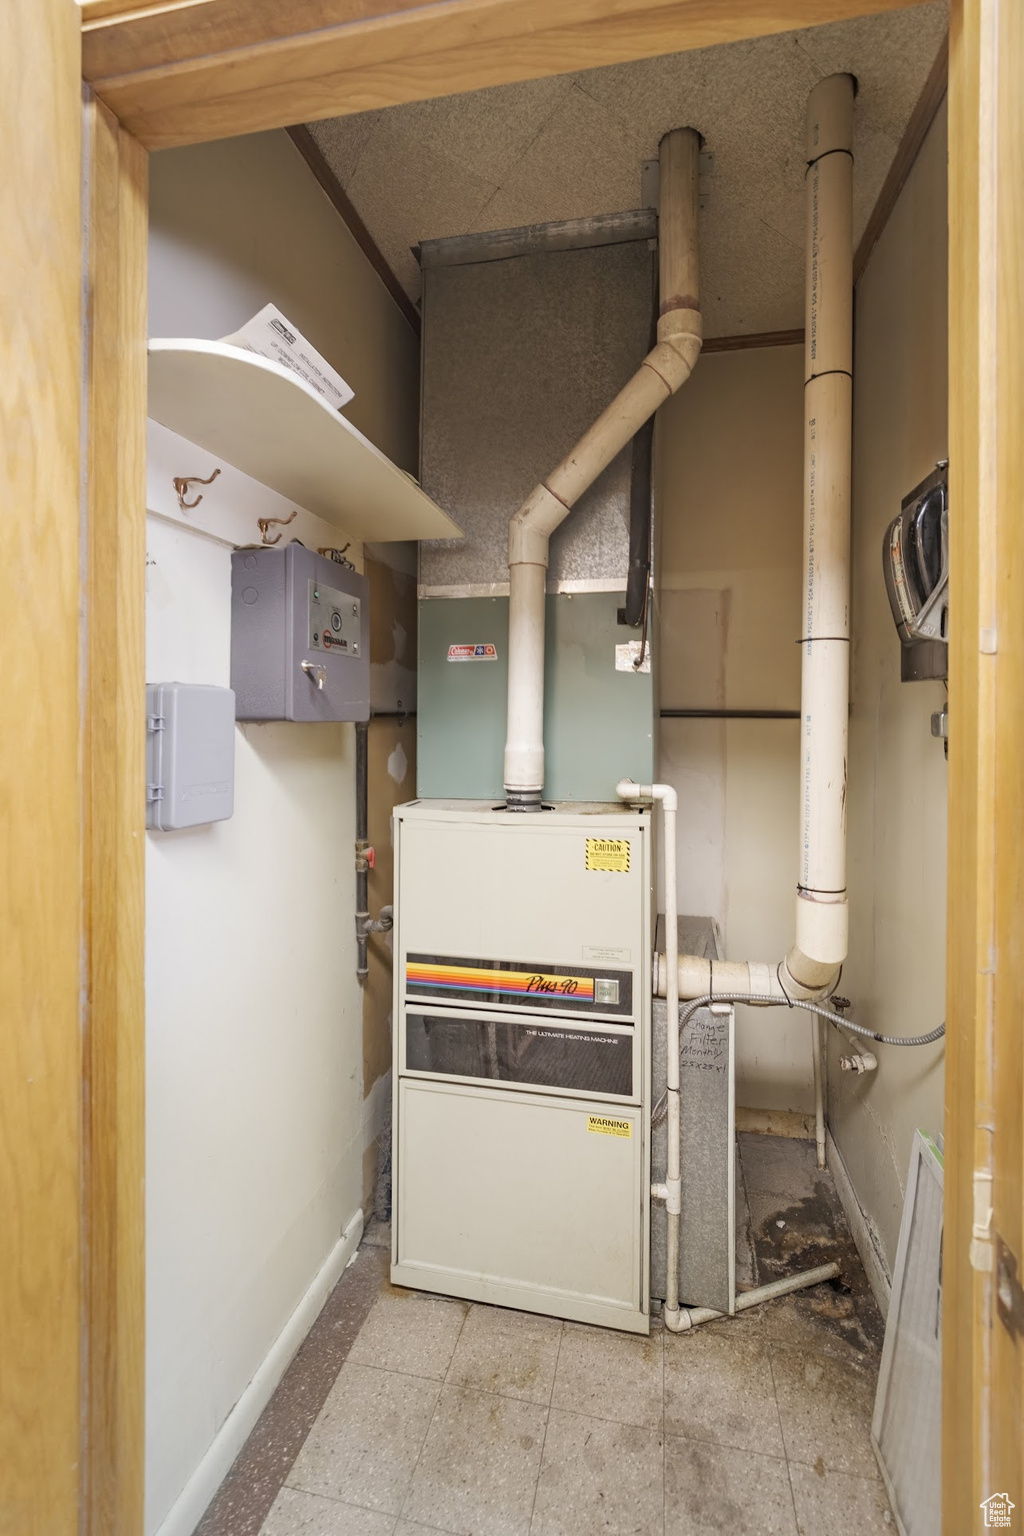 View of utility room 90% furnace